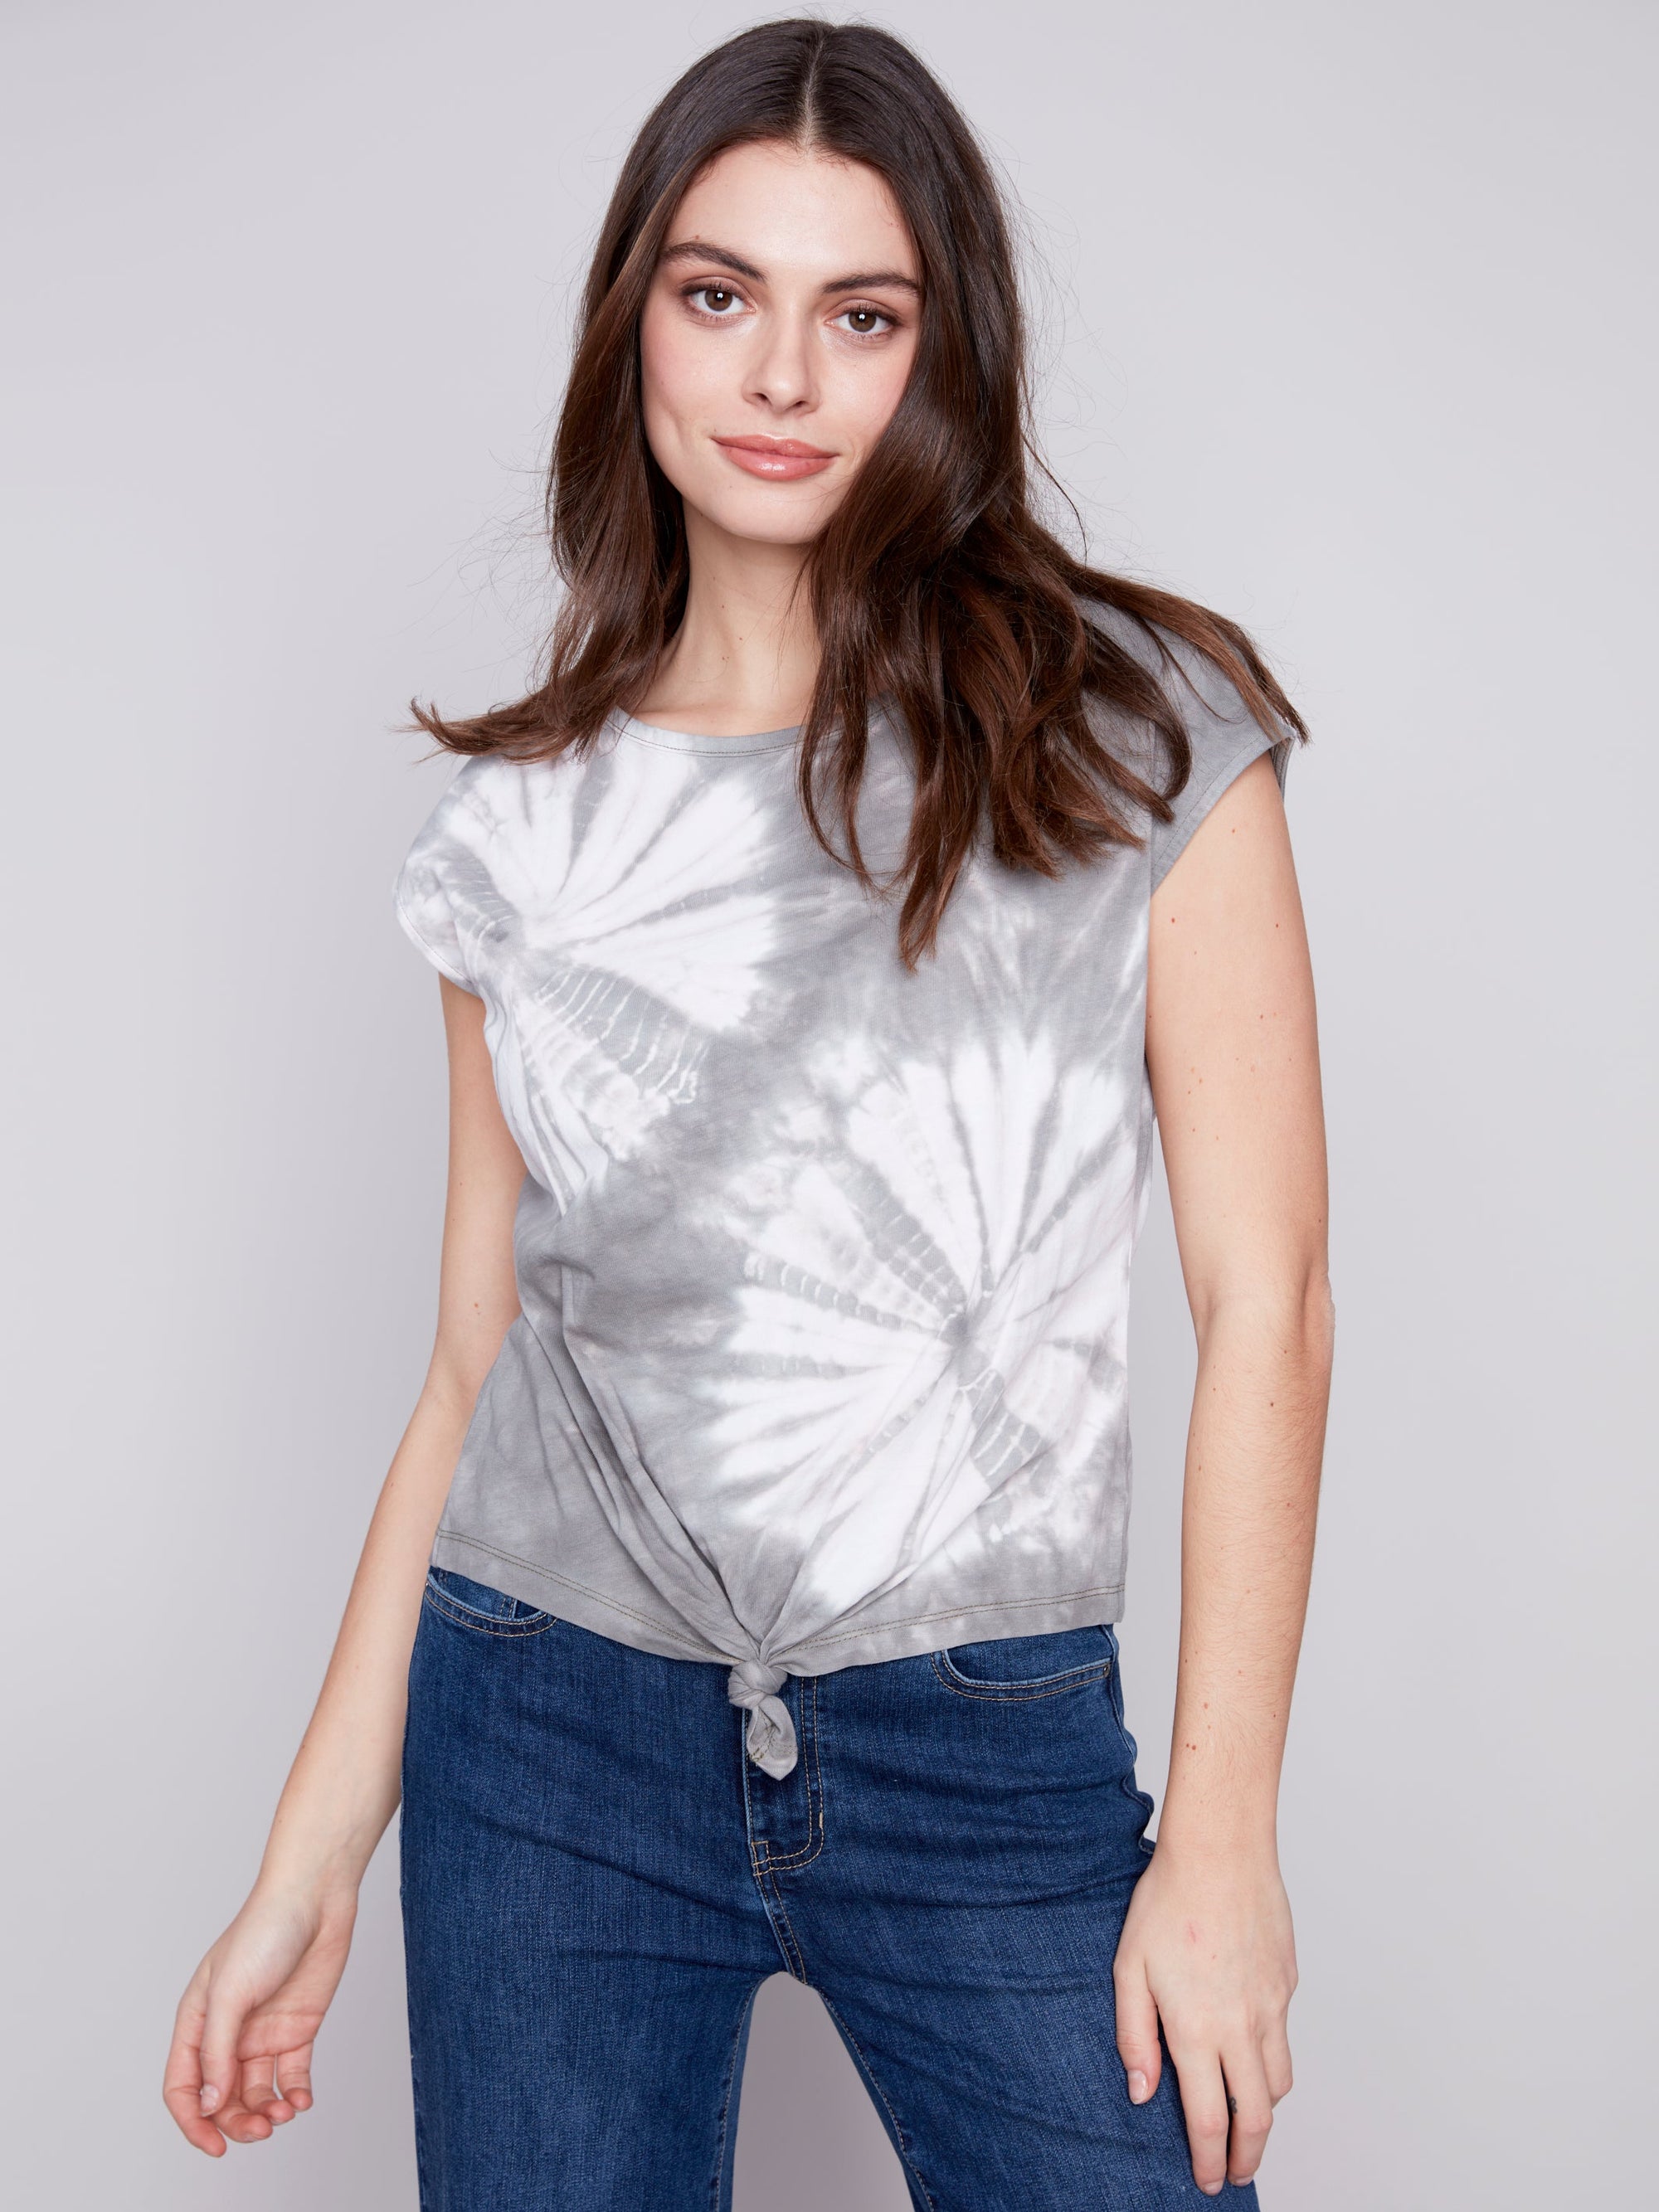 PRINTED JERSEY FRONT KNOT SLEEVELESS TOP-Tops-CHARLIE B-XSMALL-CELADON-Coriander